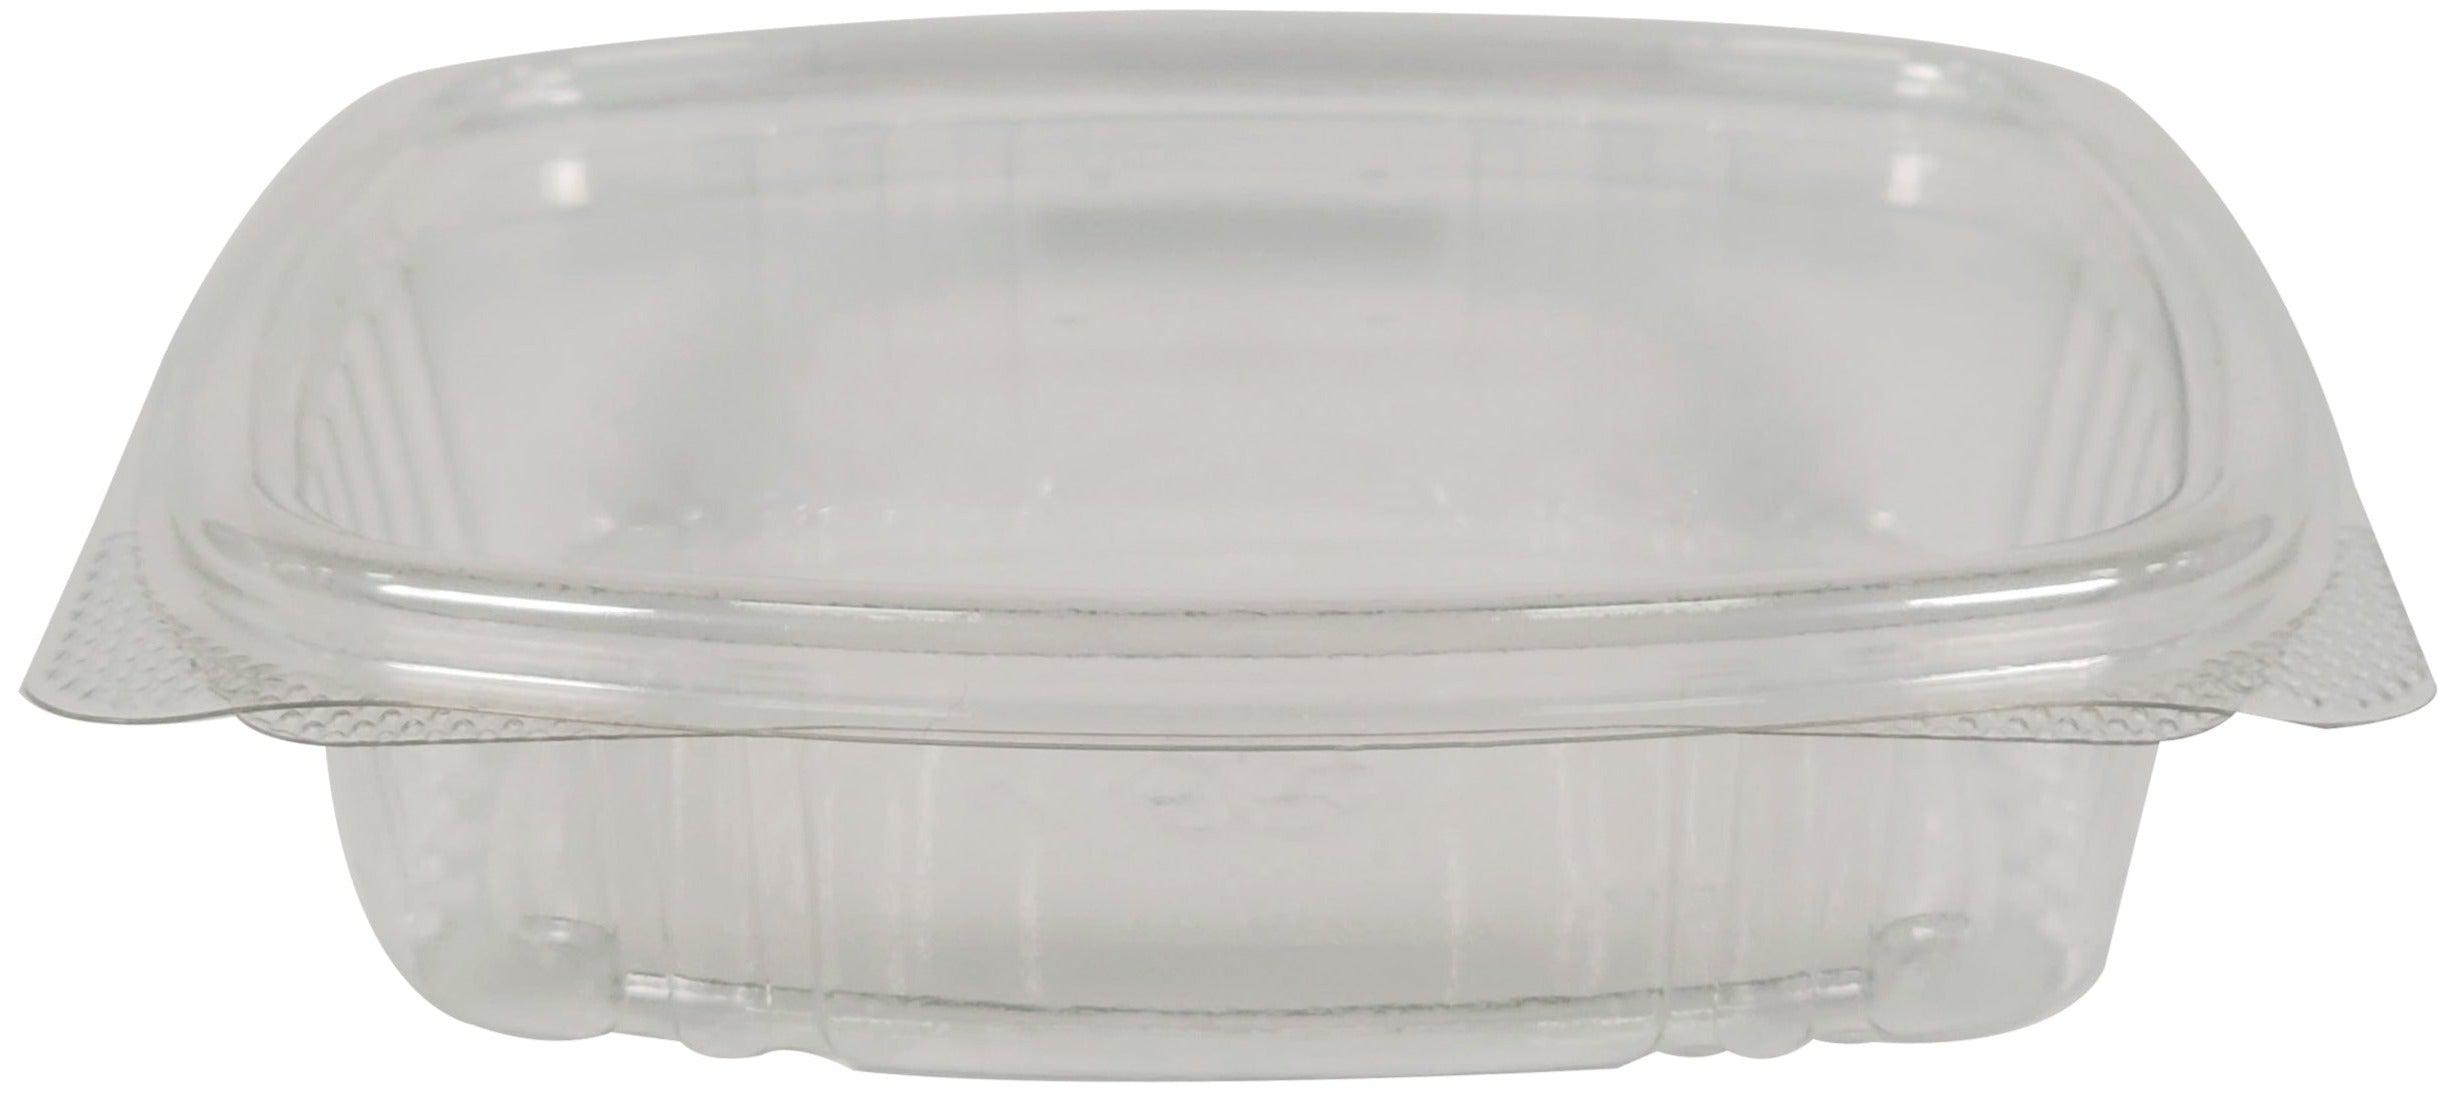 Genpak AD08 Clear Hinged Deli Container, 8oz, 5 3/8 x 4 1/2 x 1 1